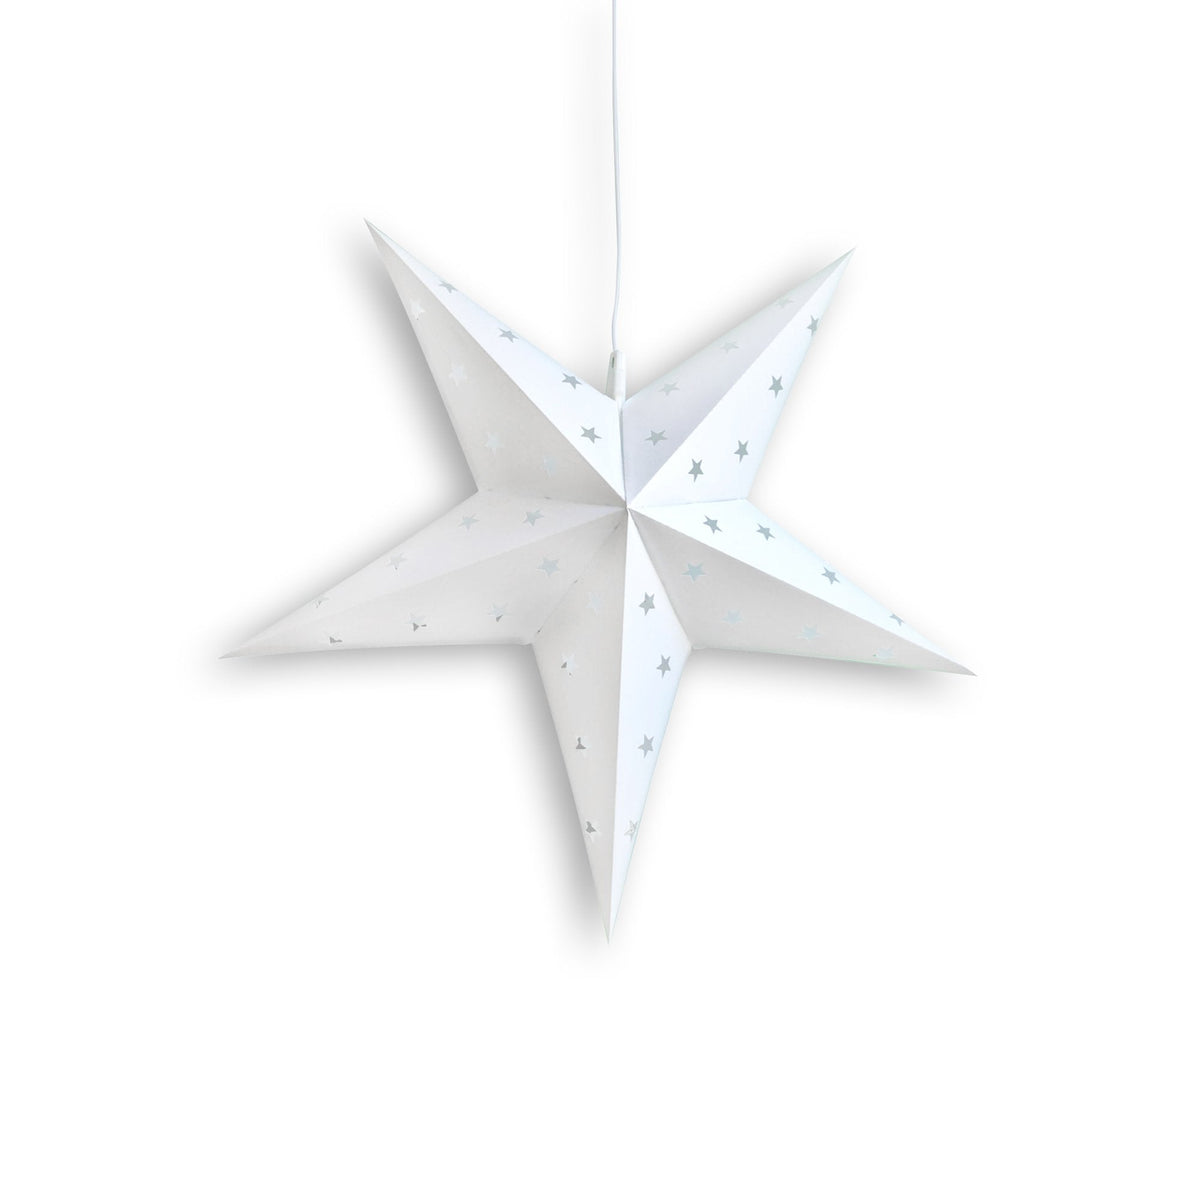 15&quot; White Weatherproof Star Lantern Lamp, Hanging Decoration (Shade Only)